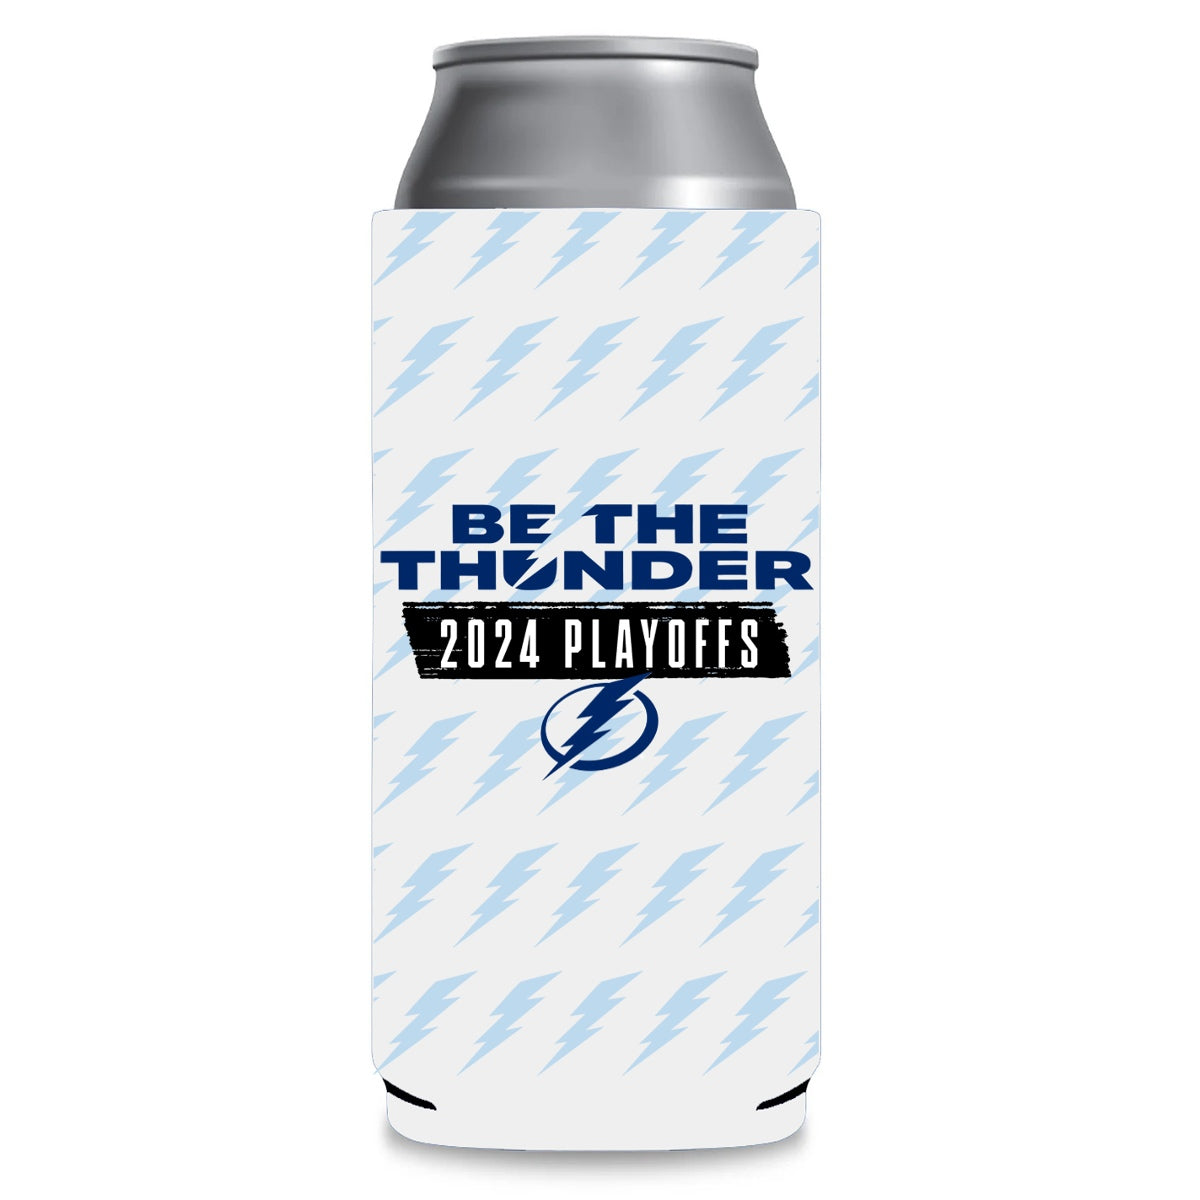 Tampa Bay Lightning 2024 Playoffs Be The Thunder Slim 12oz Can Cooler